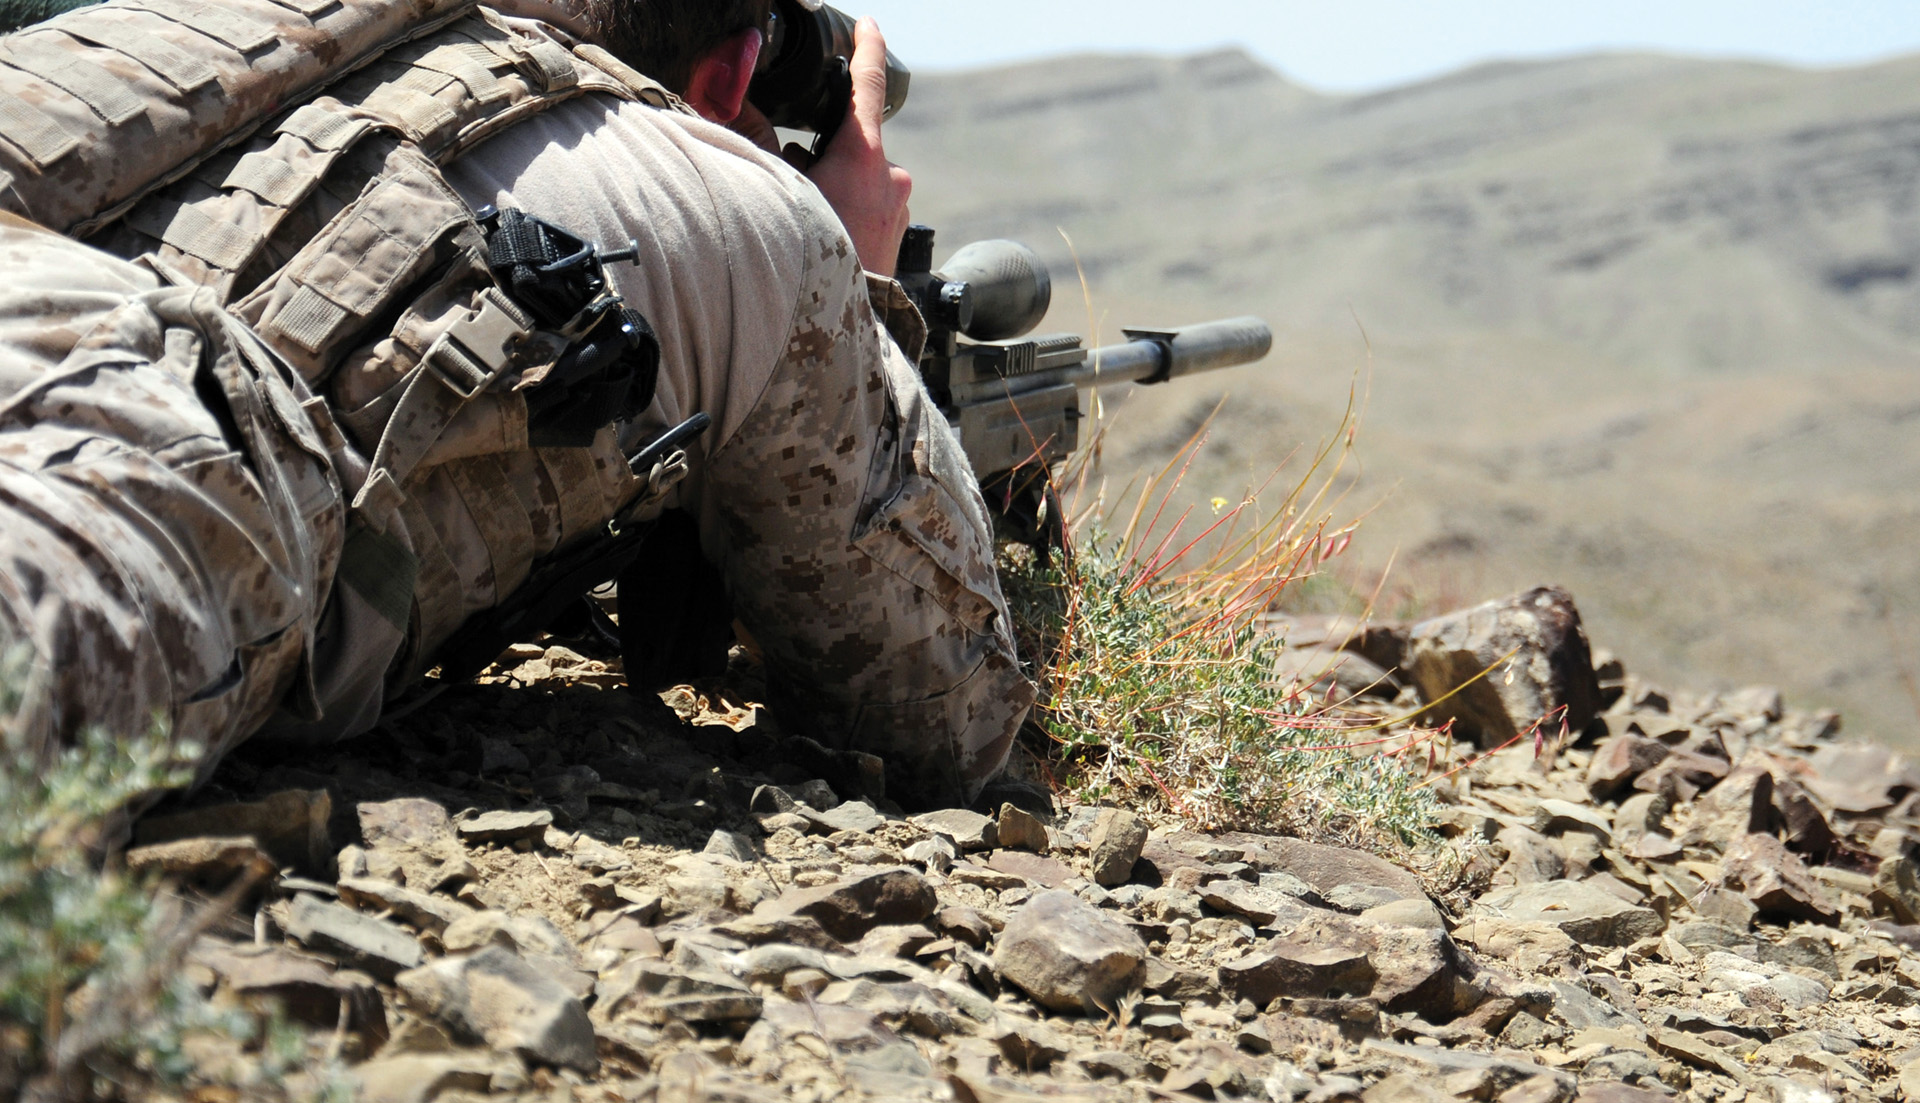 A Navy SEAL sniper uses a MK.13 Mod 5 sniper rifle while on an operation in Zabul province, Afghanistan. 